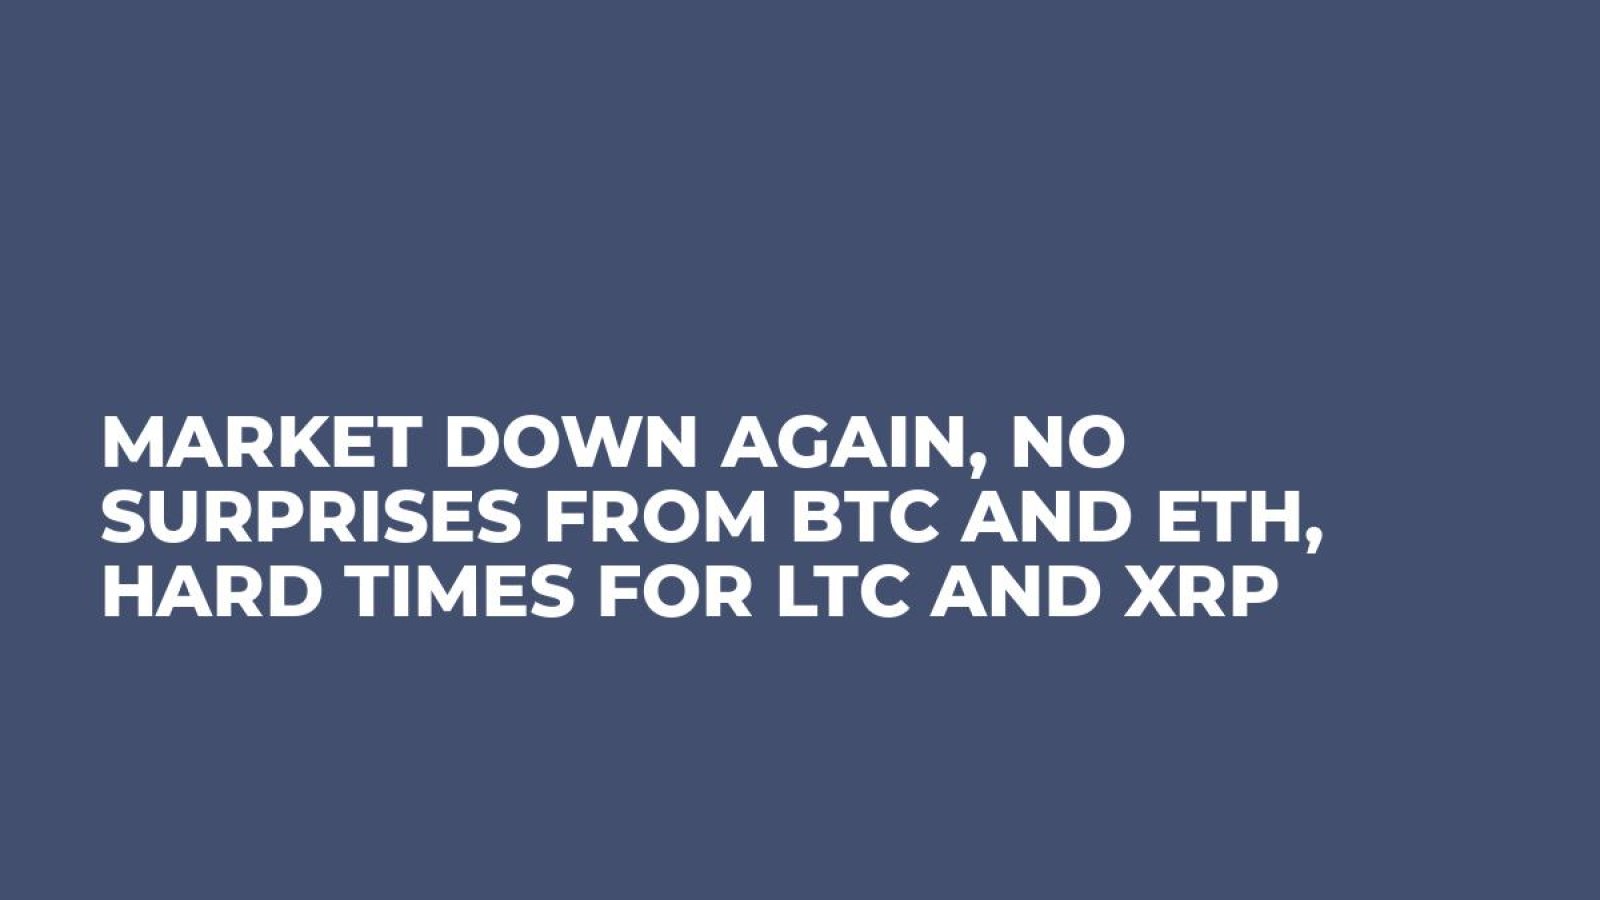 Market Down Again, No Surprises from BTC and ETH, Hard Times for LTC and XRP